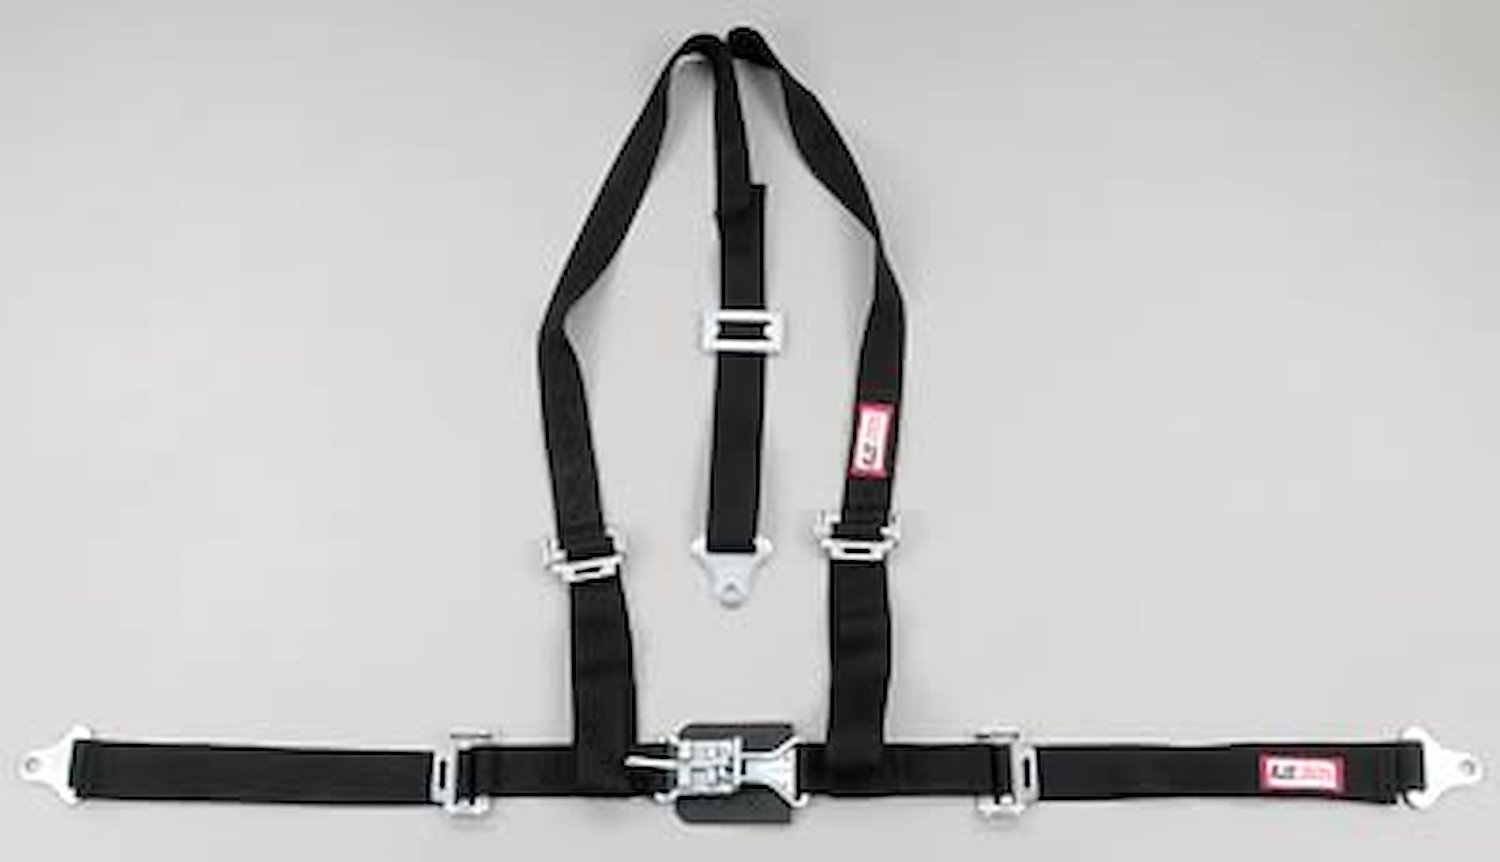 NON-SFI L&L HARNESS 3 PULL DOWN Lap Belt SEWN IN 2 S.H. Individual FLOOR Mount ALL WRAP ENDS PURPLE